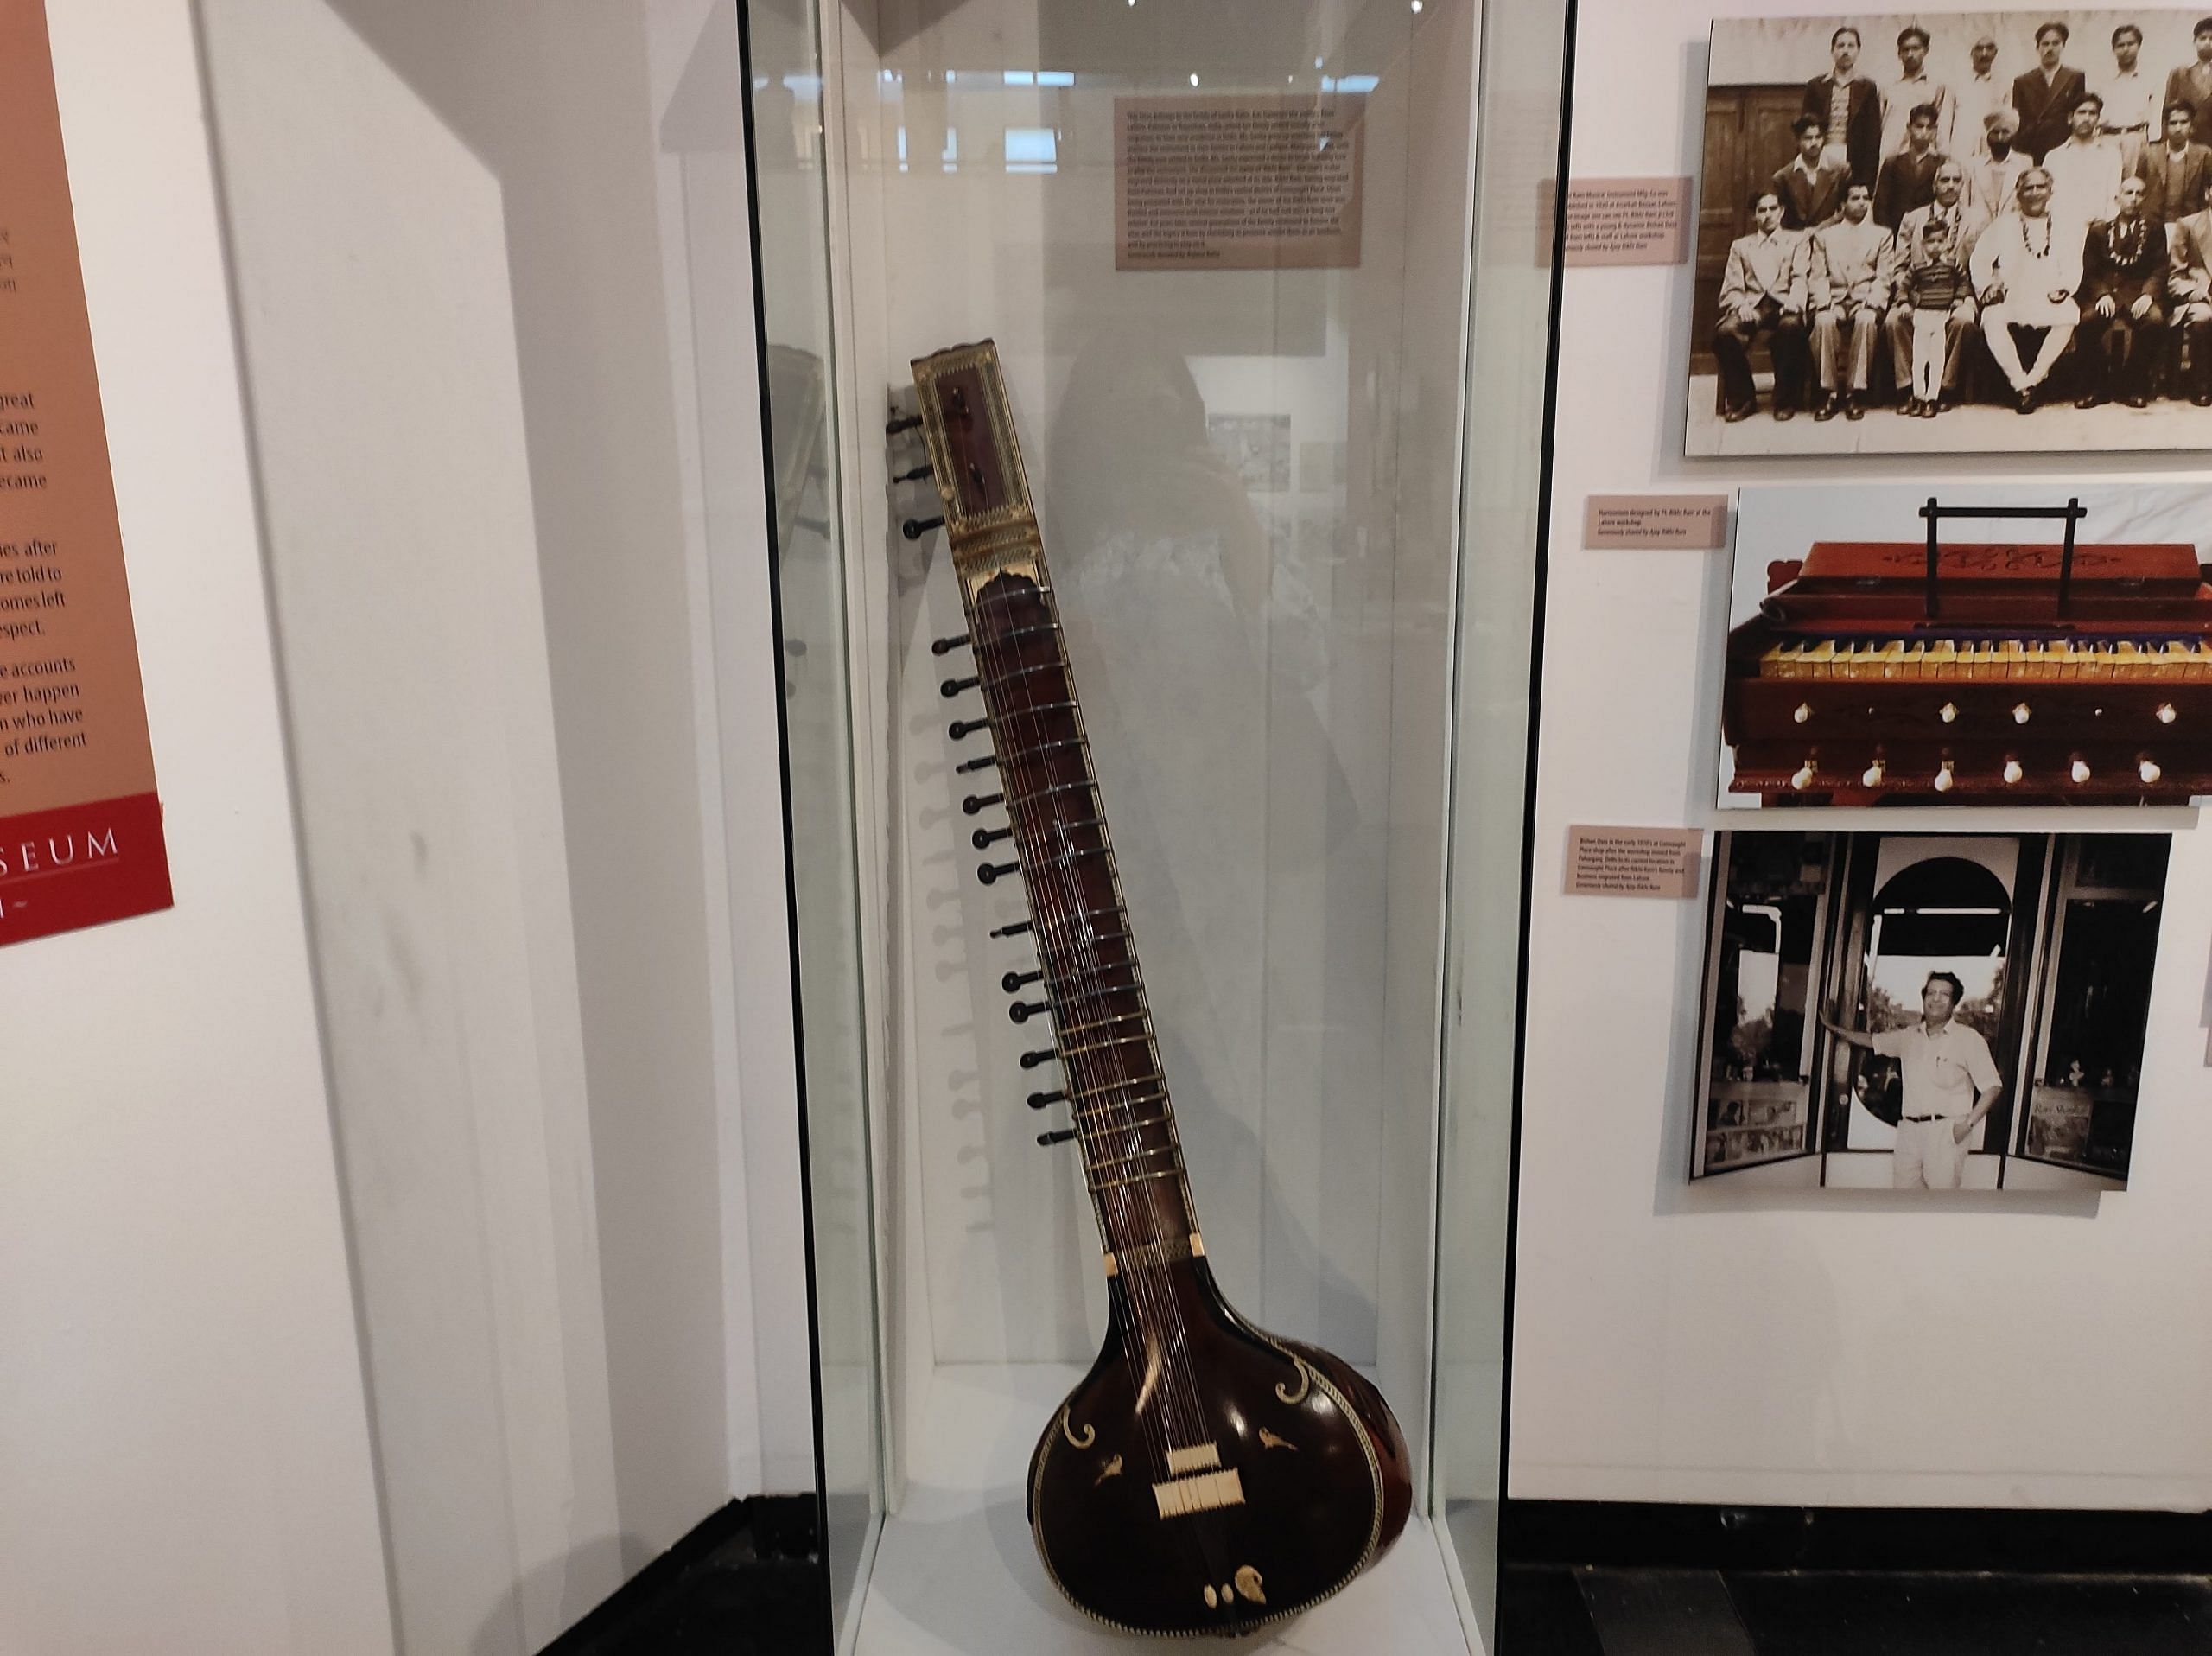 Batra family's Sitar travelled with them from Lahore and was given to Rikhi Ram to restore in Delhi. Rikhi Ram, who made that Sitar in Lahore, was described as being overcome with emotion and said as if he'd met a "long-lost relative" when reunited | Sanskriti Bhatnagar/ThePrint